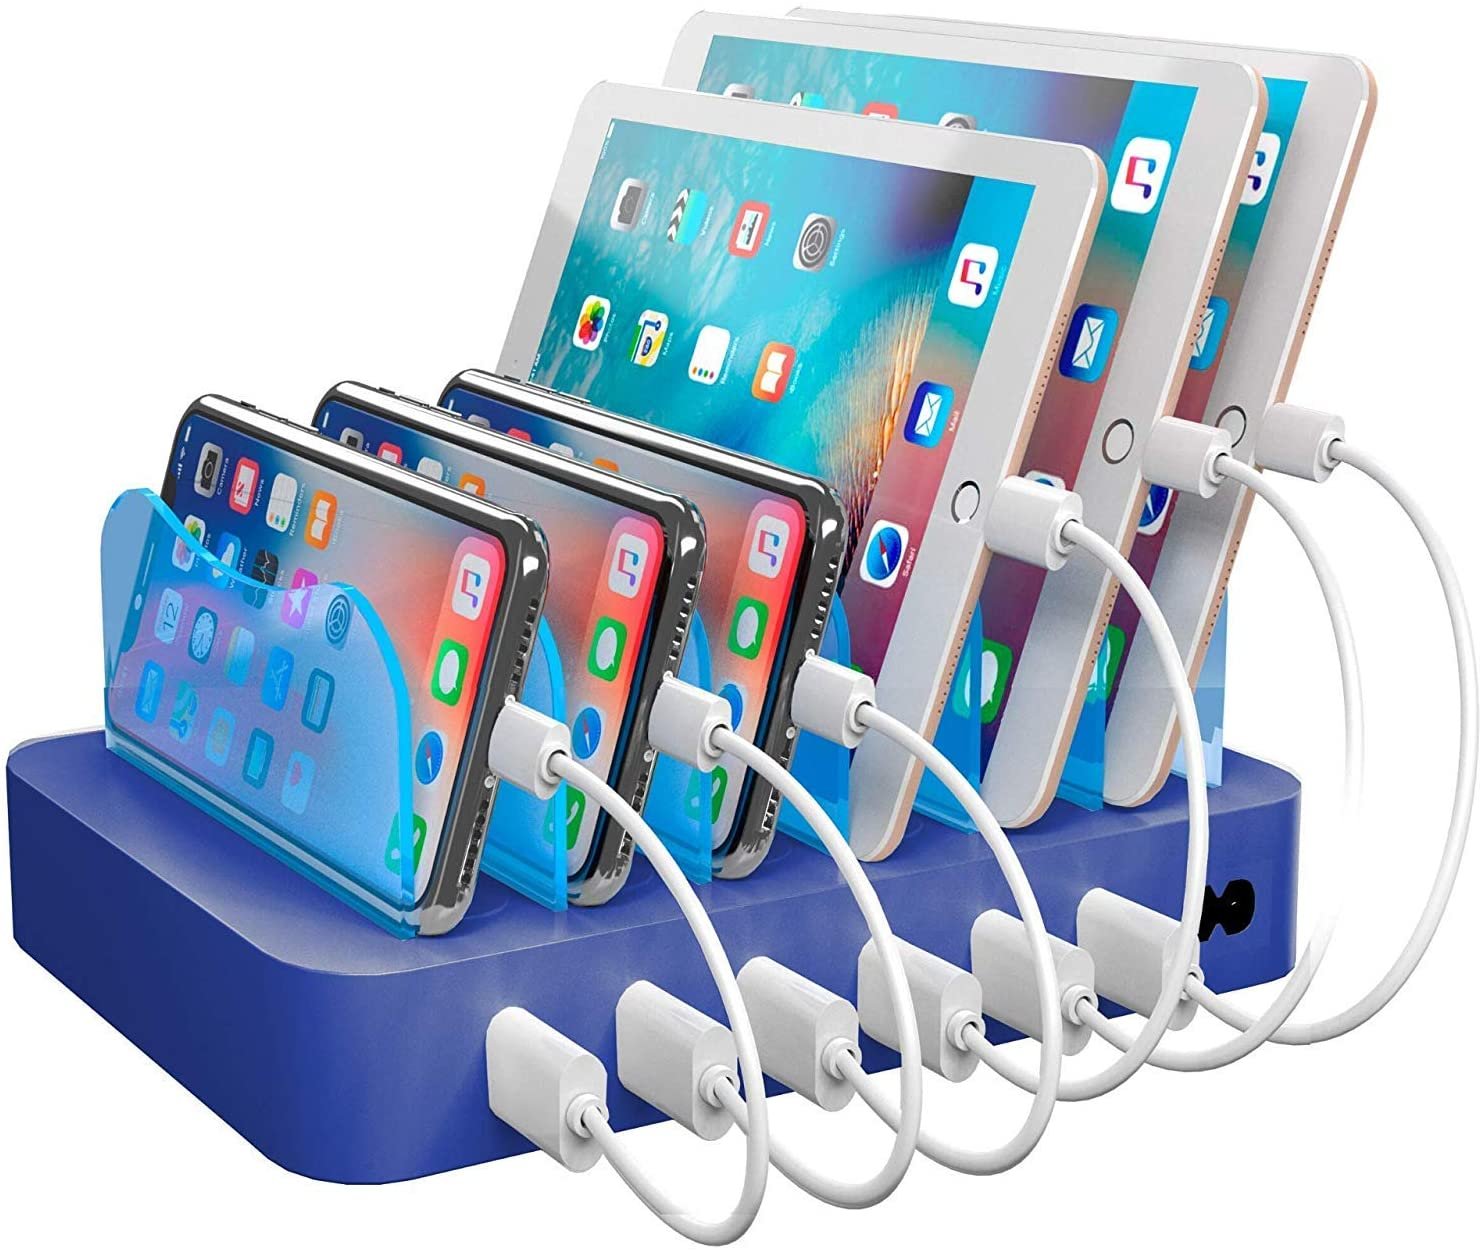 Charge device. Phone Charger. Charging device. Desk Charger desktop Charger Charging Station Mounts 2. Charger Phone 14 Pro Max.